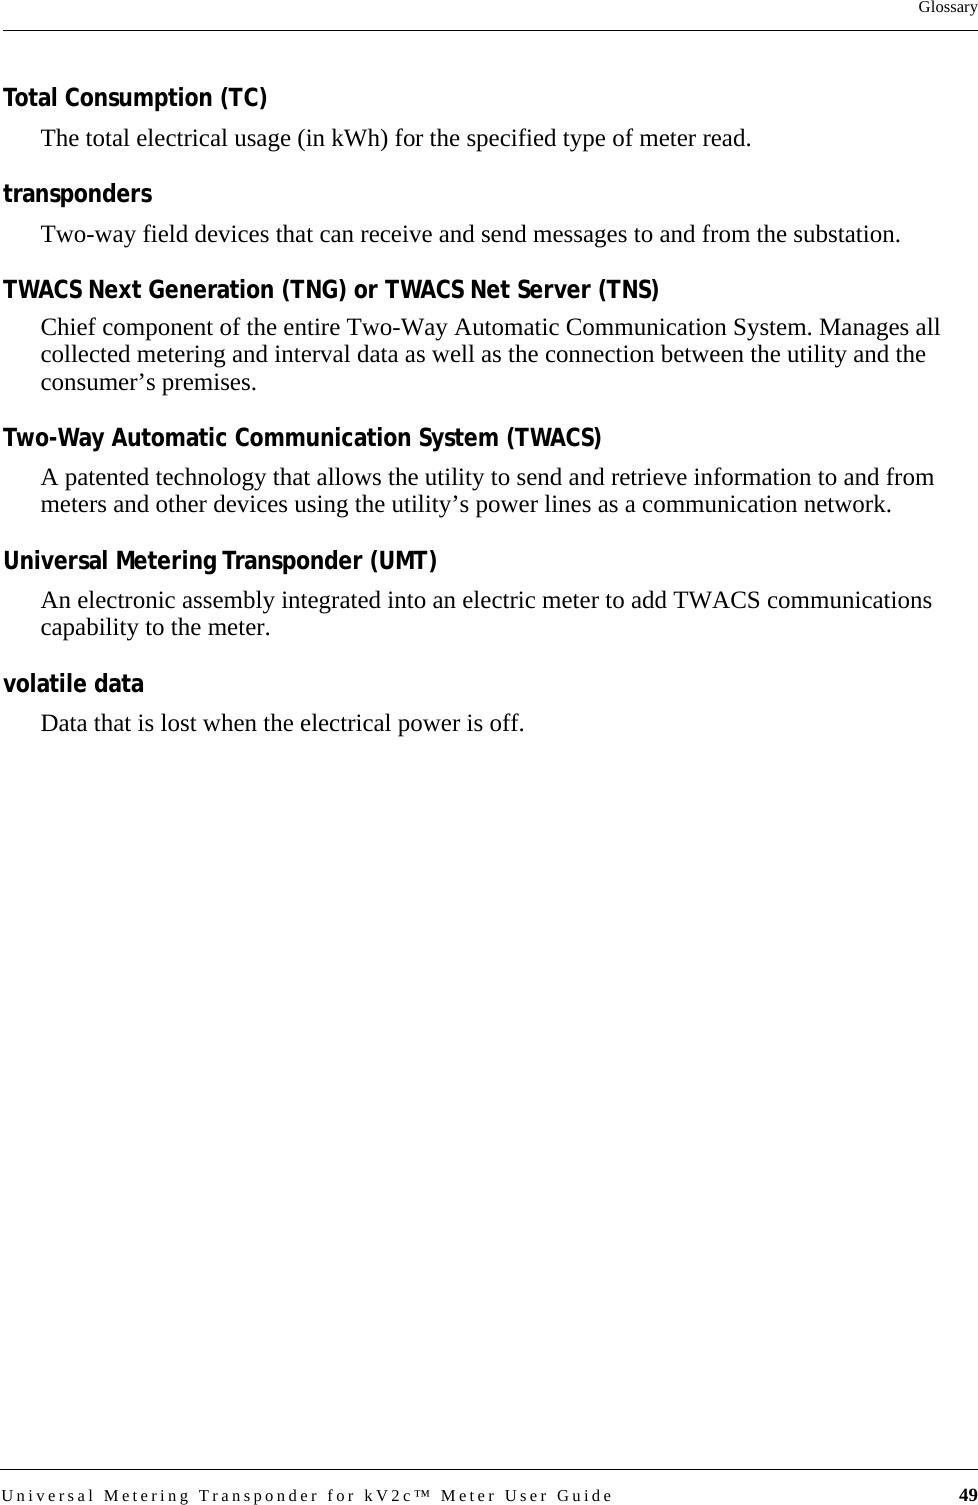 Universal Metering Transponder for kV2c™ Meter User Guide 49GlossaryTotal Consumption (TC)The total electrical usage (in kWh) for the specified type of meter read.transpondersTwo-way field devices that can receive and send messages to and from the substation.TWACS Next Generation (TNG) or TWACS Net Server (TNS)Chief component of the entire Two-Way Automatic Communication System. Manages all collected metering and interval data as well as the connection between the utility and the consumer’s premises.Two-Way Automatic Communication System (TWACS) A patented technology that allows the utility to send and retrieve information to and from meters and other devices using the utility’s power lines as a communication network.Universal Metering Transponder (UMT)An electronic assembly integrated into an electric meter to add TWACS communications capability to the meter.volatile dataData that is lost when the electrical power is off.